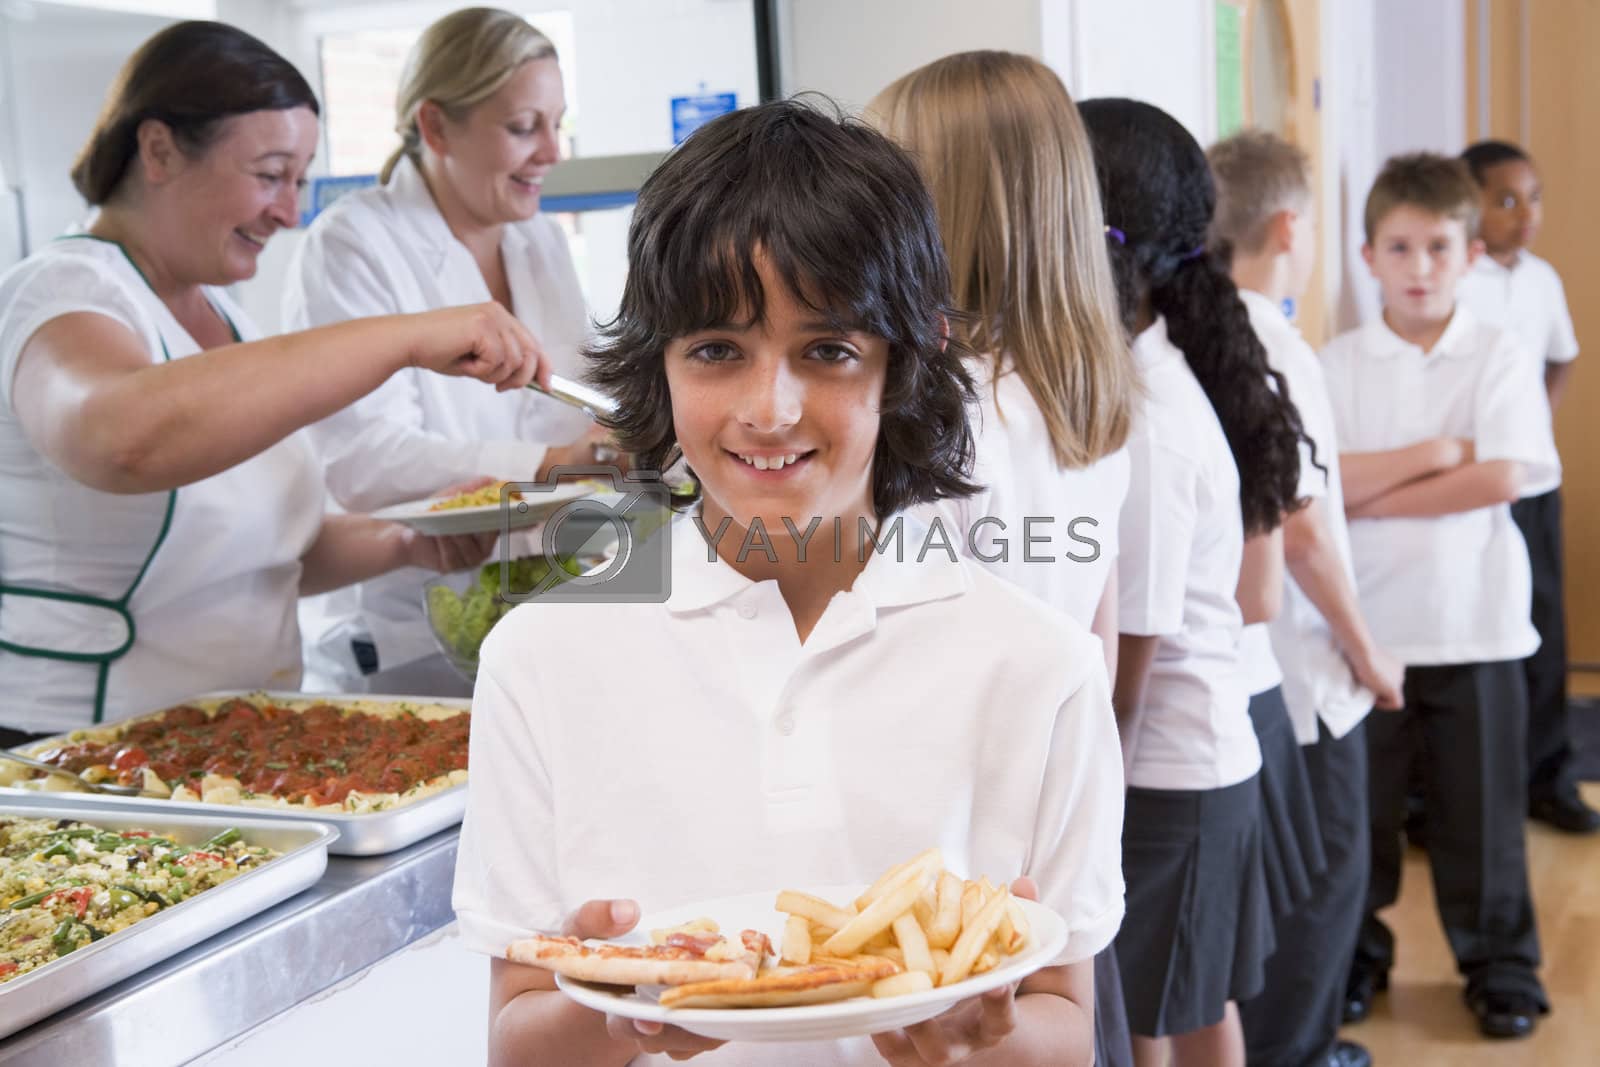 Royalty free image of Students in cafeteria line with one holding his healthy meal and looking at camera (depth of field) by MonkeyBusiness